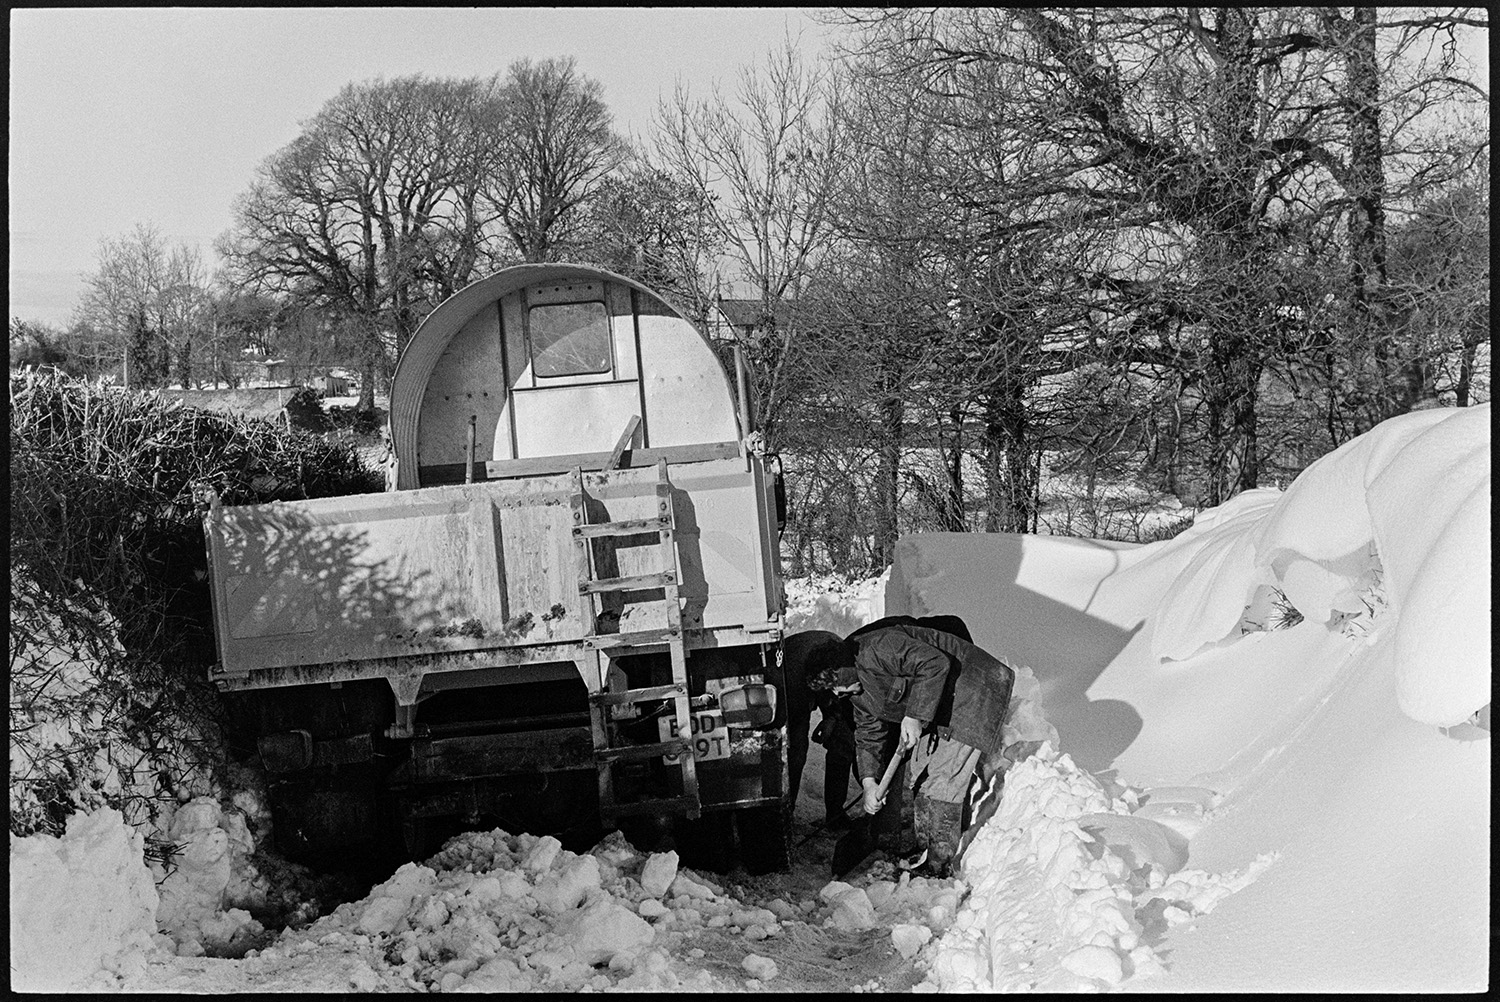 Snow, drift in road, men digging out gritting lorry and spreading from back, small barn in snow. 
[Men digging out a gritting lorry from a snowdrift, using shovels, in a lane at Langham, Dolton. Trees and a hedge can be seen in the background.]